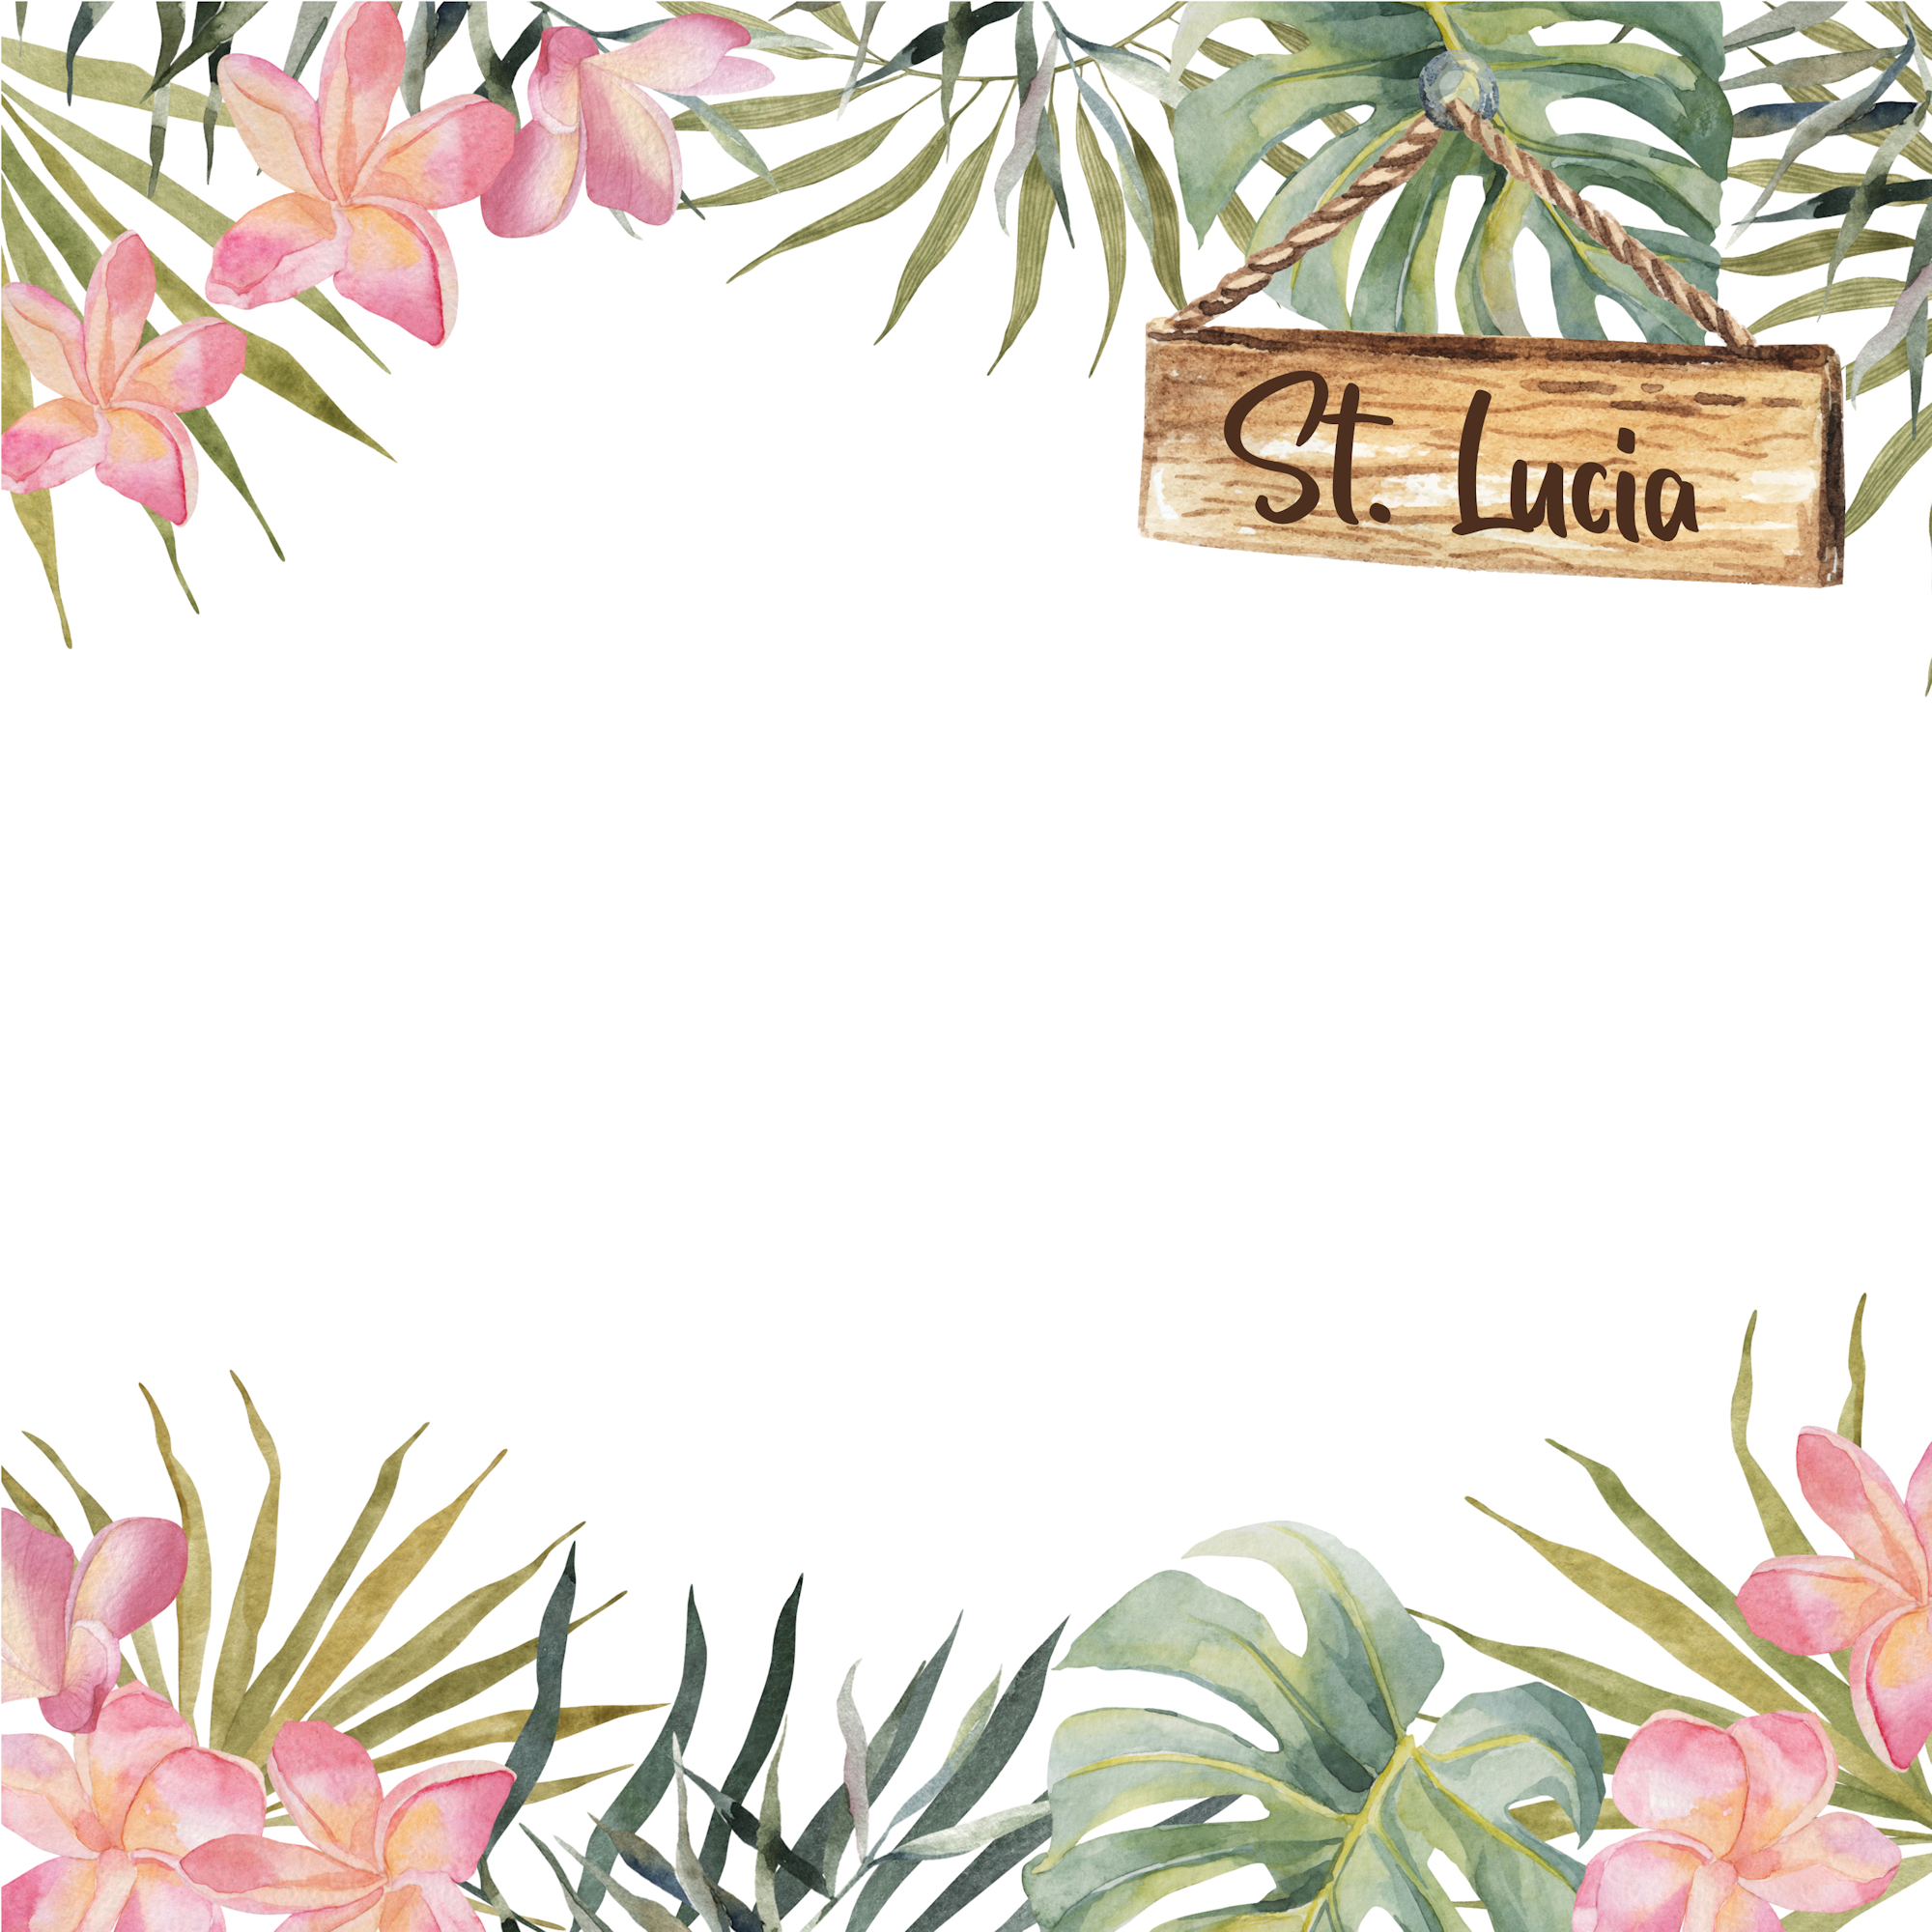 Tropical Paradise Collection St. Lucia 12 x 12 Double-Sided Scrapbook Paper by SSC Designs